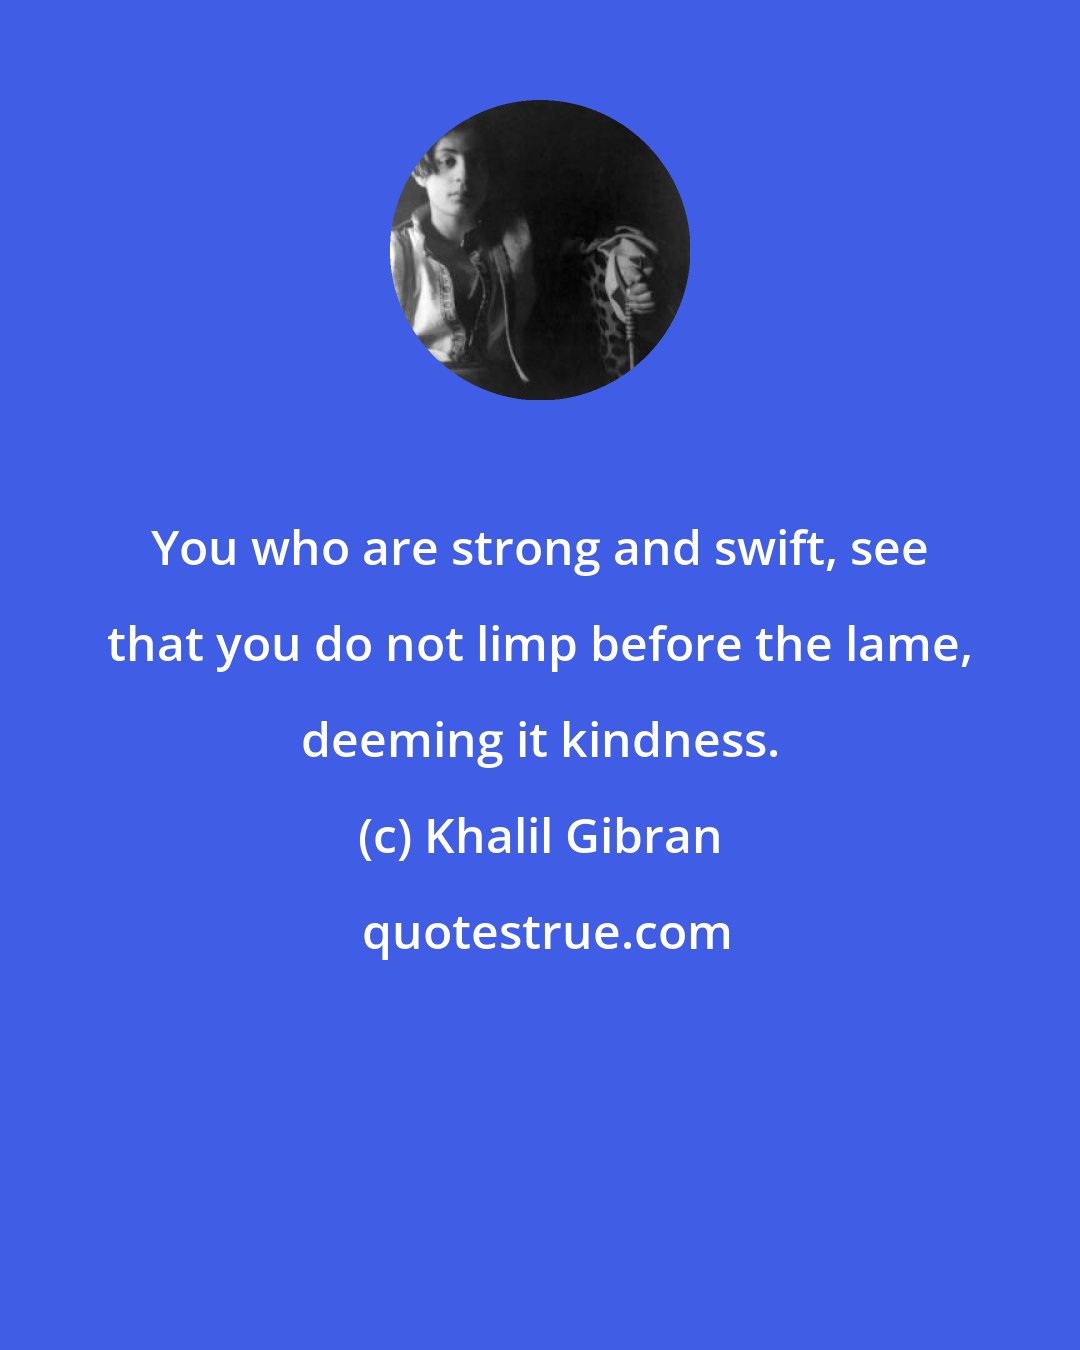 Khalil Gibran: You who are strong and swift, see that you do not limp before the lame, deeming it kindness.